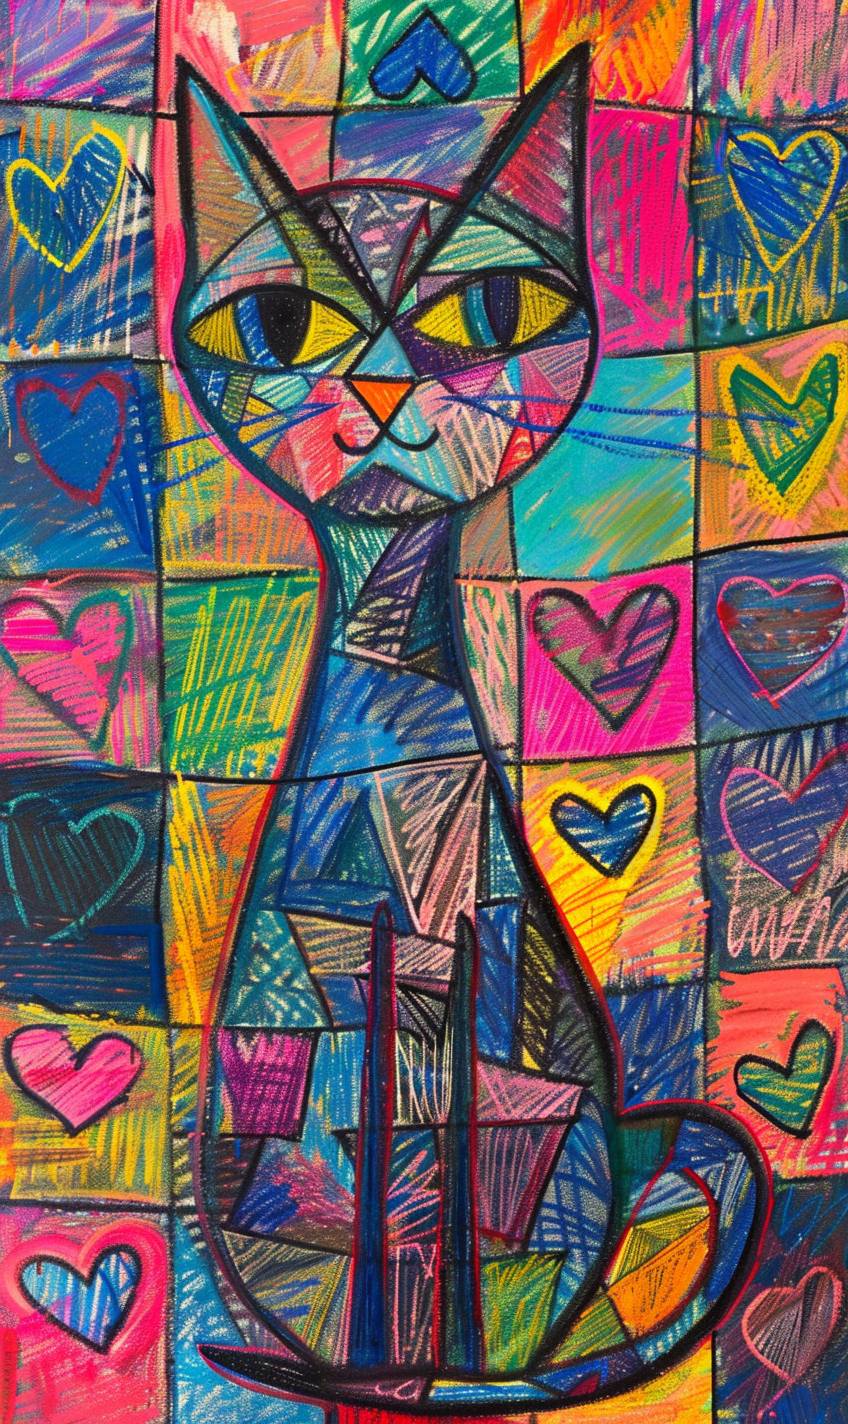 Risograph print of an oil pastel holographic scene with a cat, in the art style of Itzchak Tarkay. The artwork features a myriad of heart patterns, rich front and back views, and color blocks expressed in a simplistic manner. The style is reminiscent of surrealism, with predominantly bright and colorful hues, resembling oil paintings and sketchy fauvism in the style of Maira Kalman and Matisse.